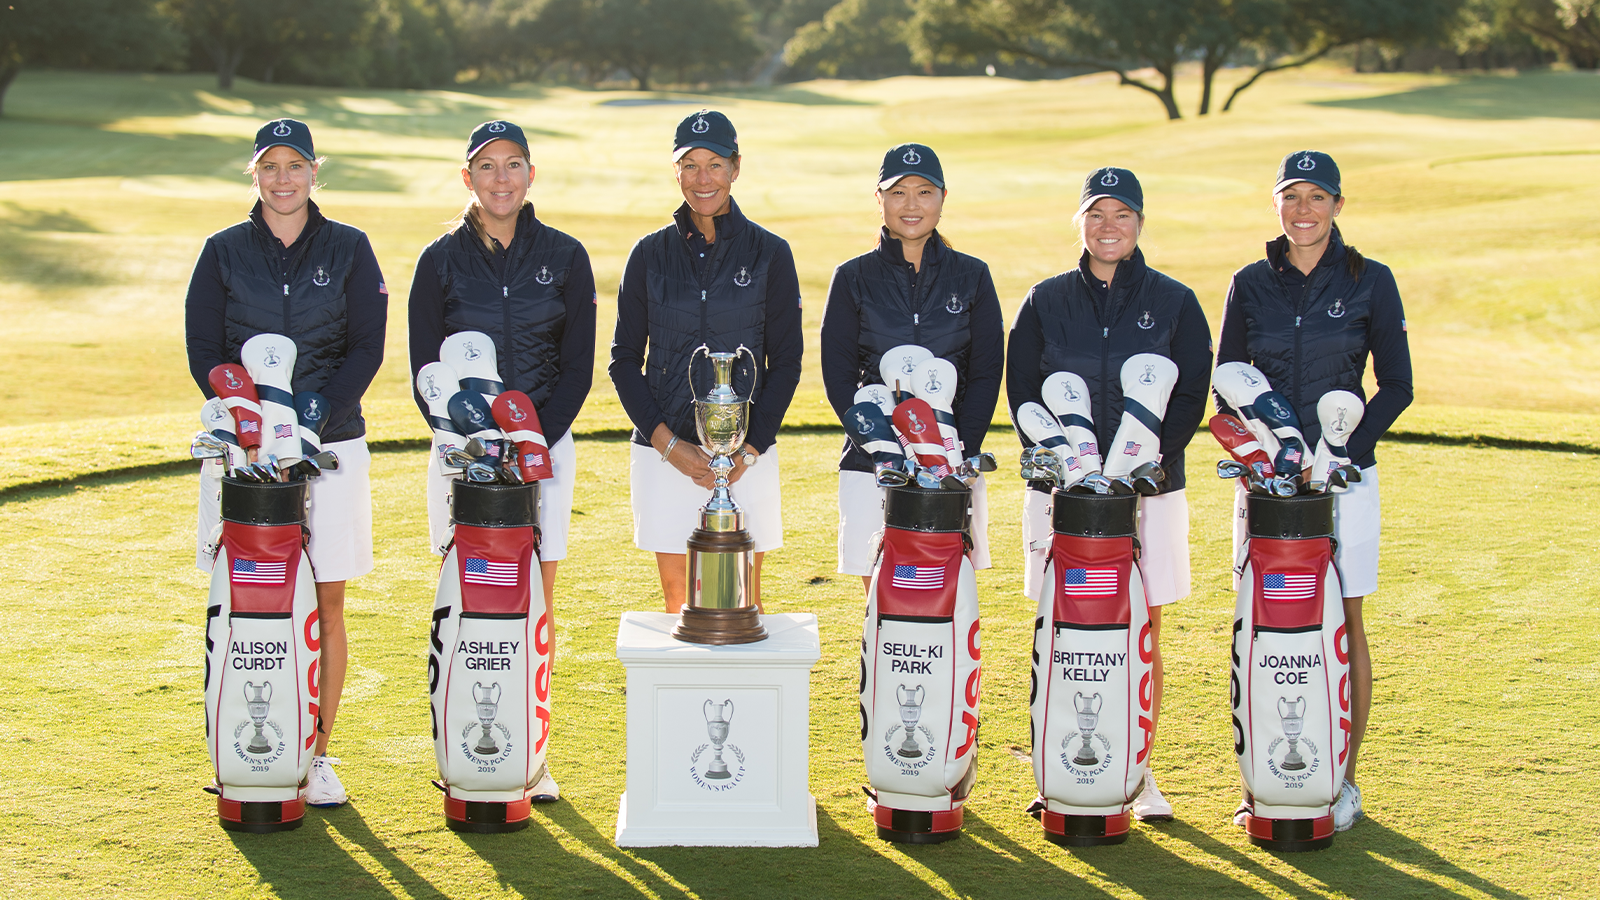 Alison Curdt of the United States, Ashley Grier of the United States, United States Captain, Suzy Whaley, Seul-Ki Park of the United States, Brittany Kelly of the United States and Joanna Coe of the United States pose for a photo during a practice round for the 2019 Women’s PGA Cup held at the Omni Barton Creek Resort & Spa on October 23, 2019 in Austin, Texas. (Photo by Montana Pritchard/PGA of America)